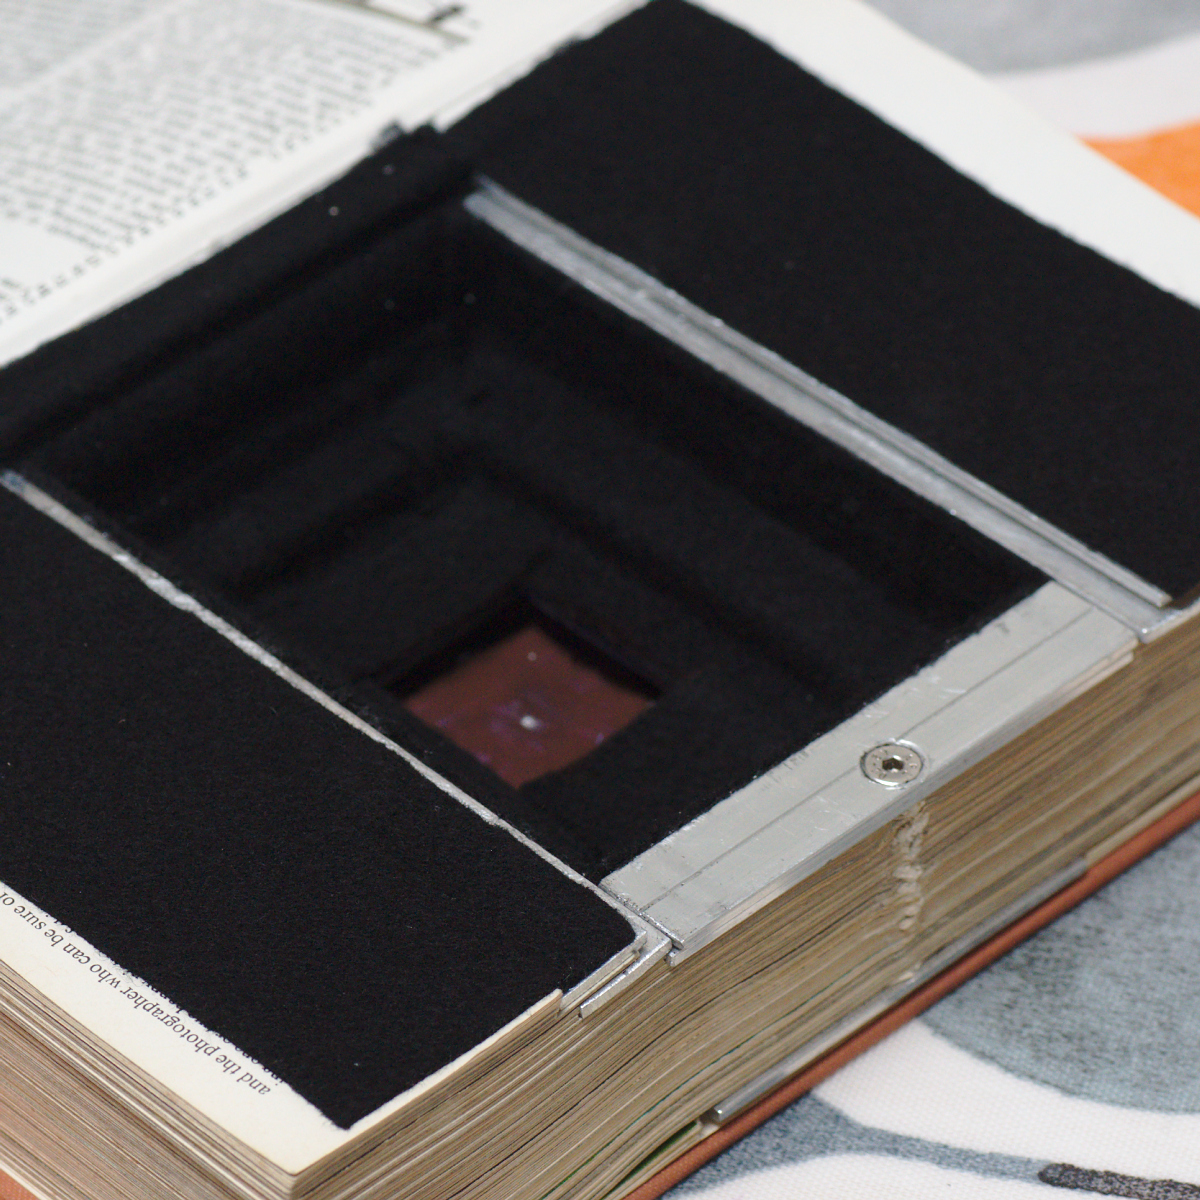 The back of the book, showing self-adhesive black felt lining the cavity and covering the edges.